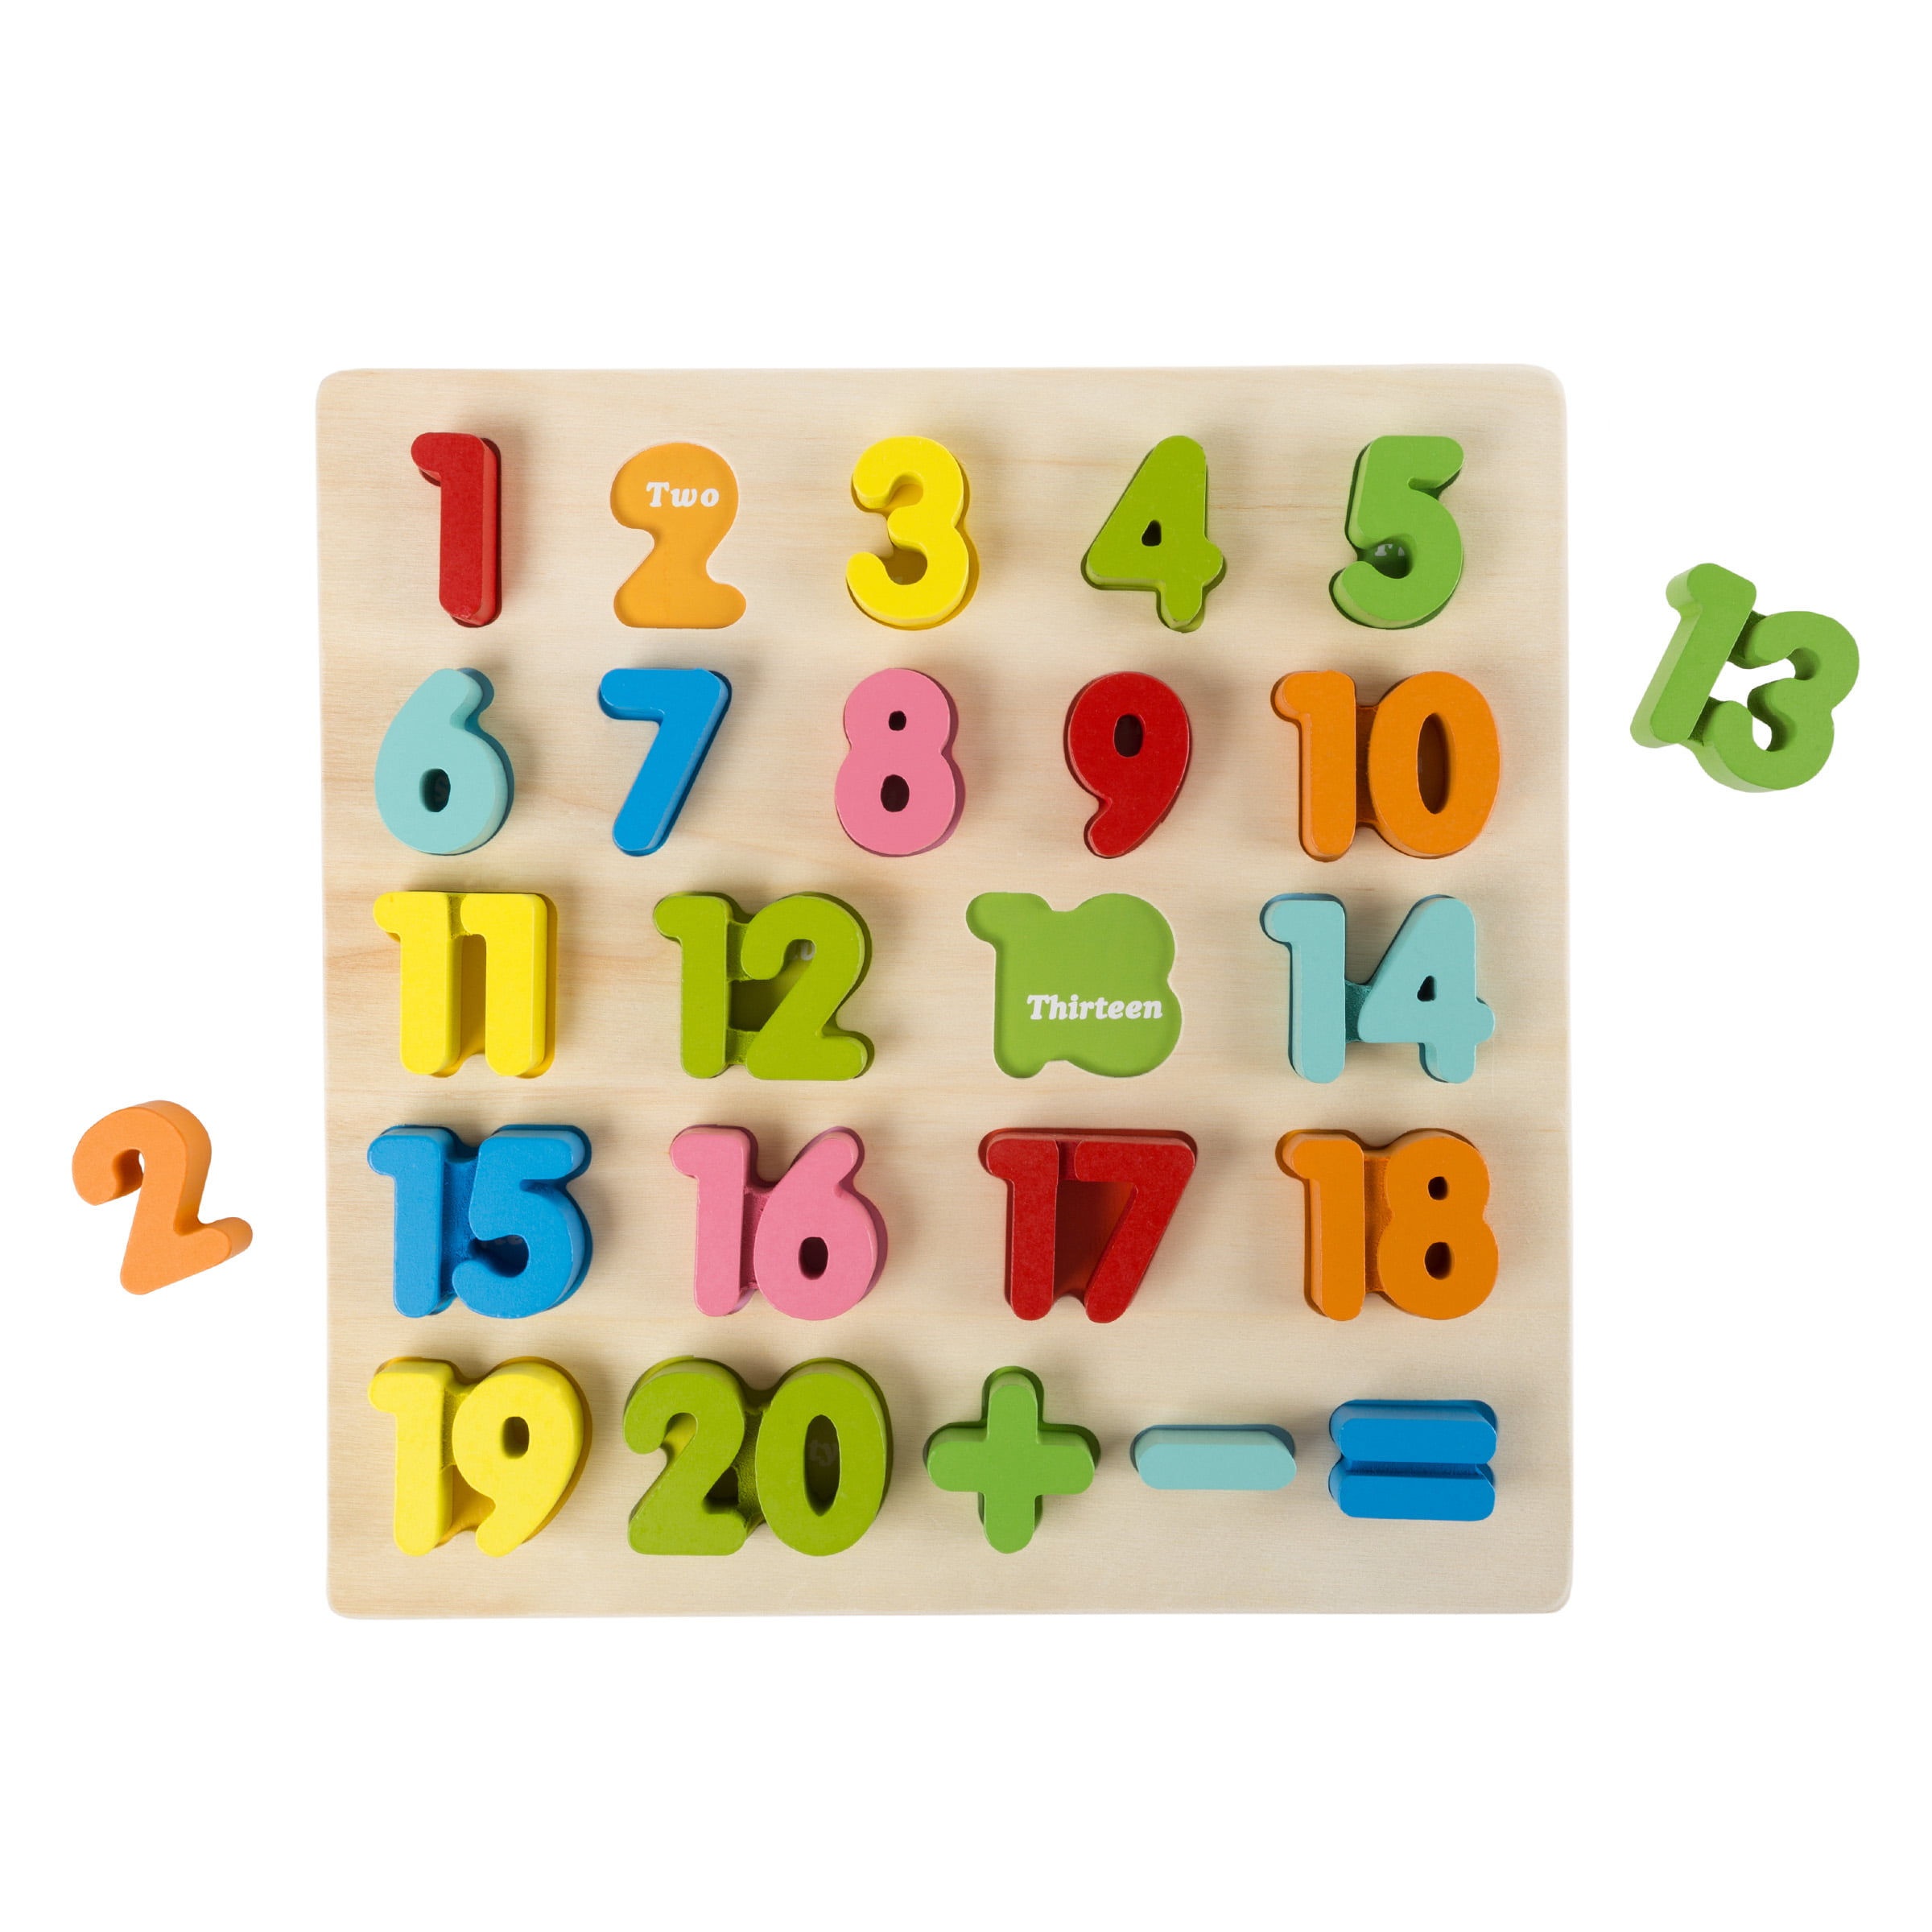 30 Learning Numbers And Symbols Wooden Kids Maths Counting Educational Toy 